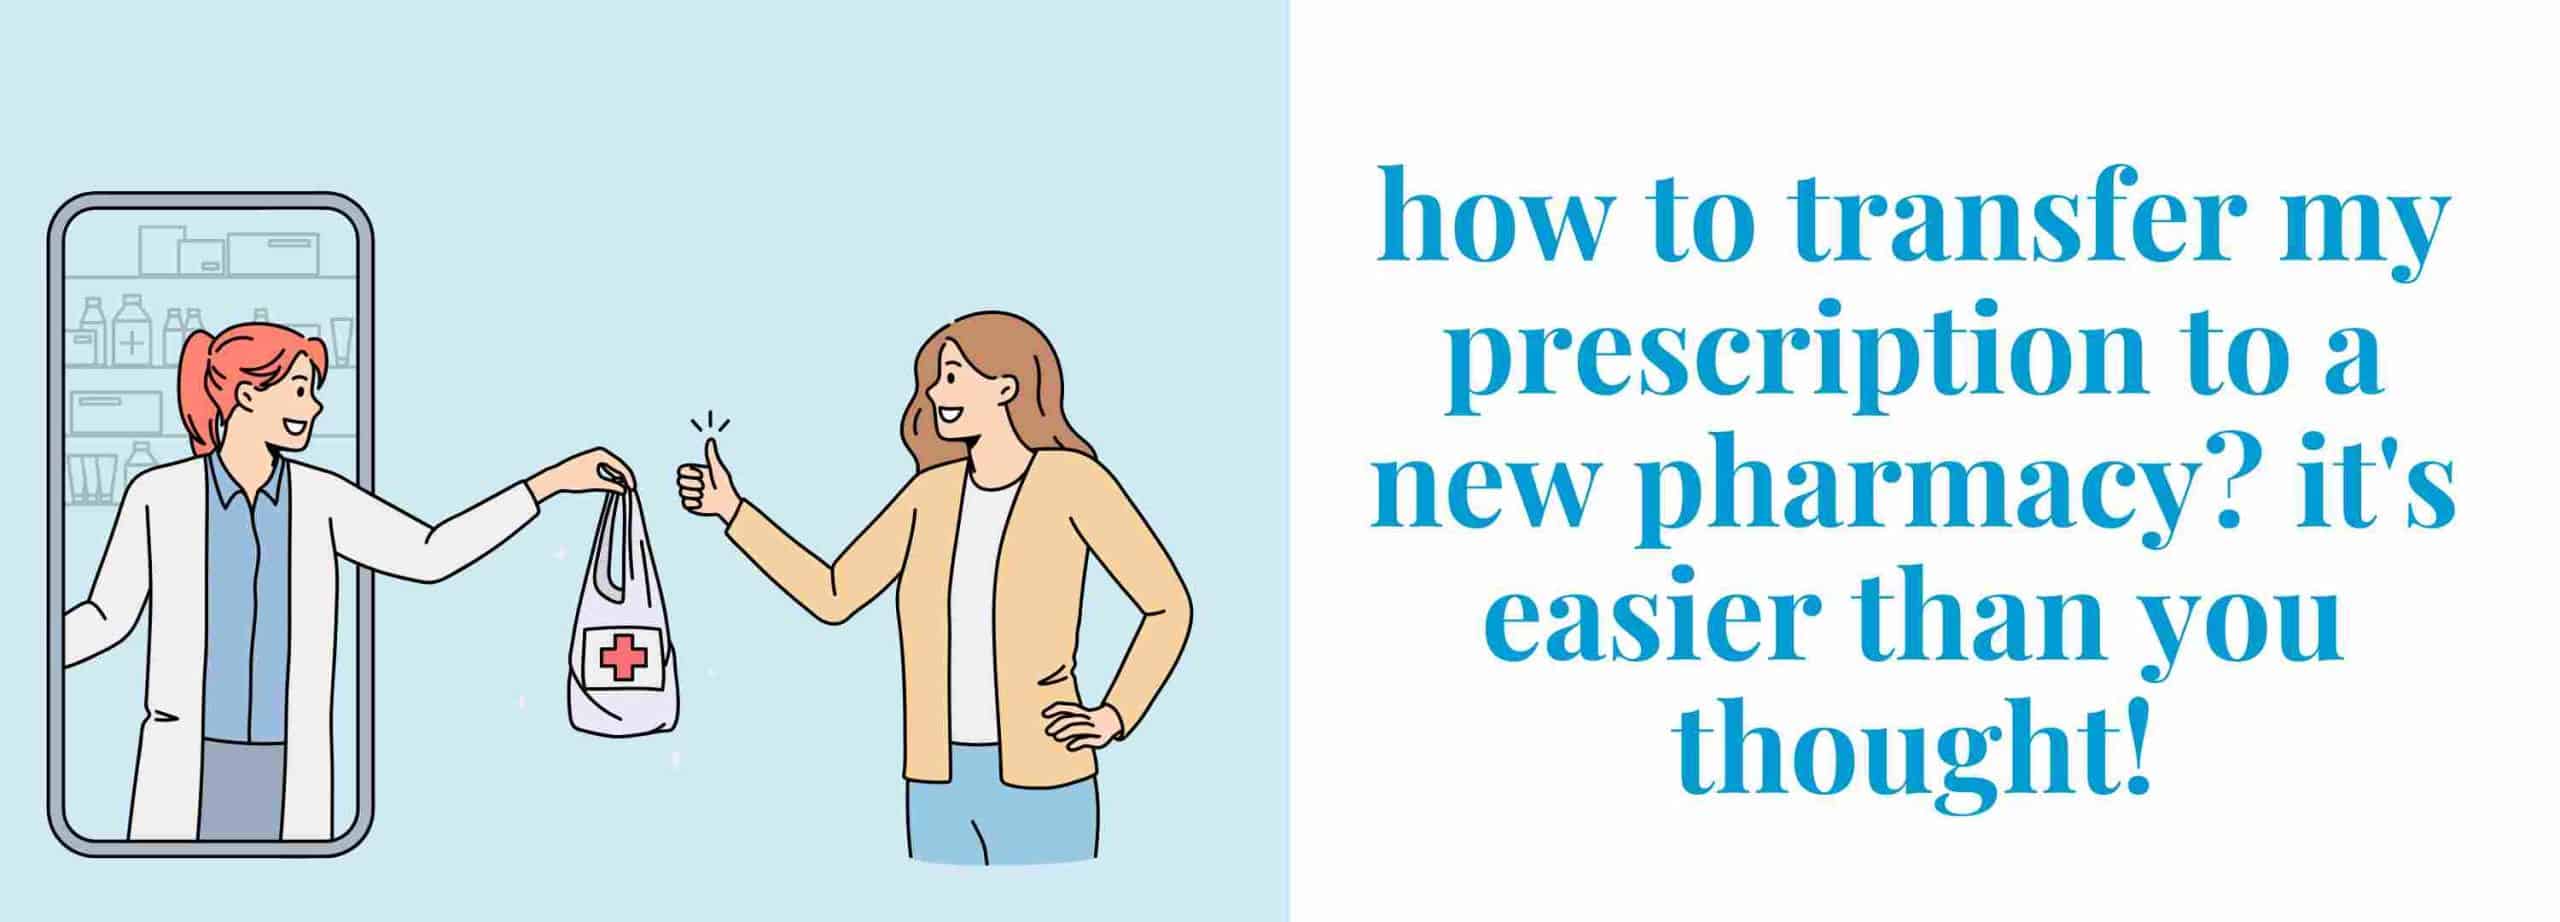 How to transfer a prescription? Is easier than you thought!